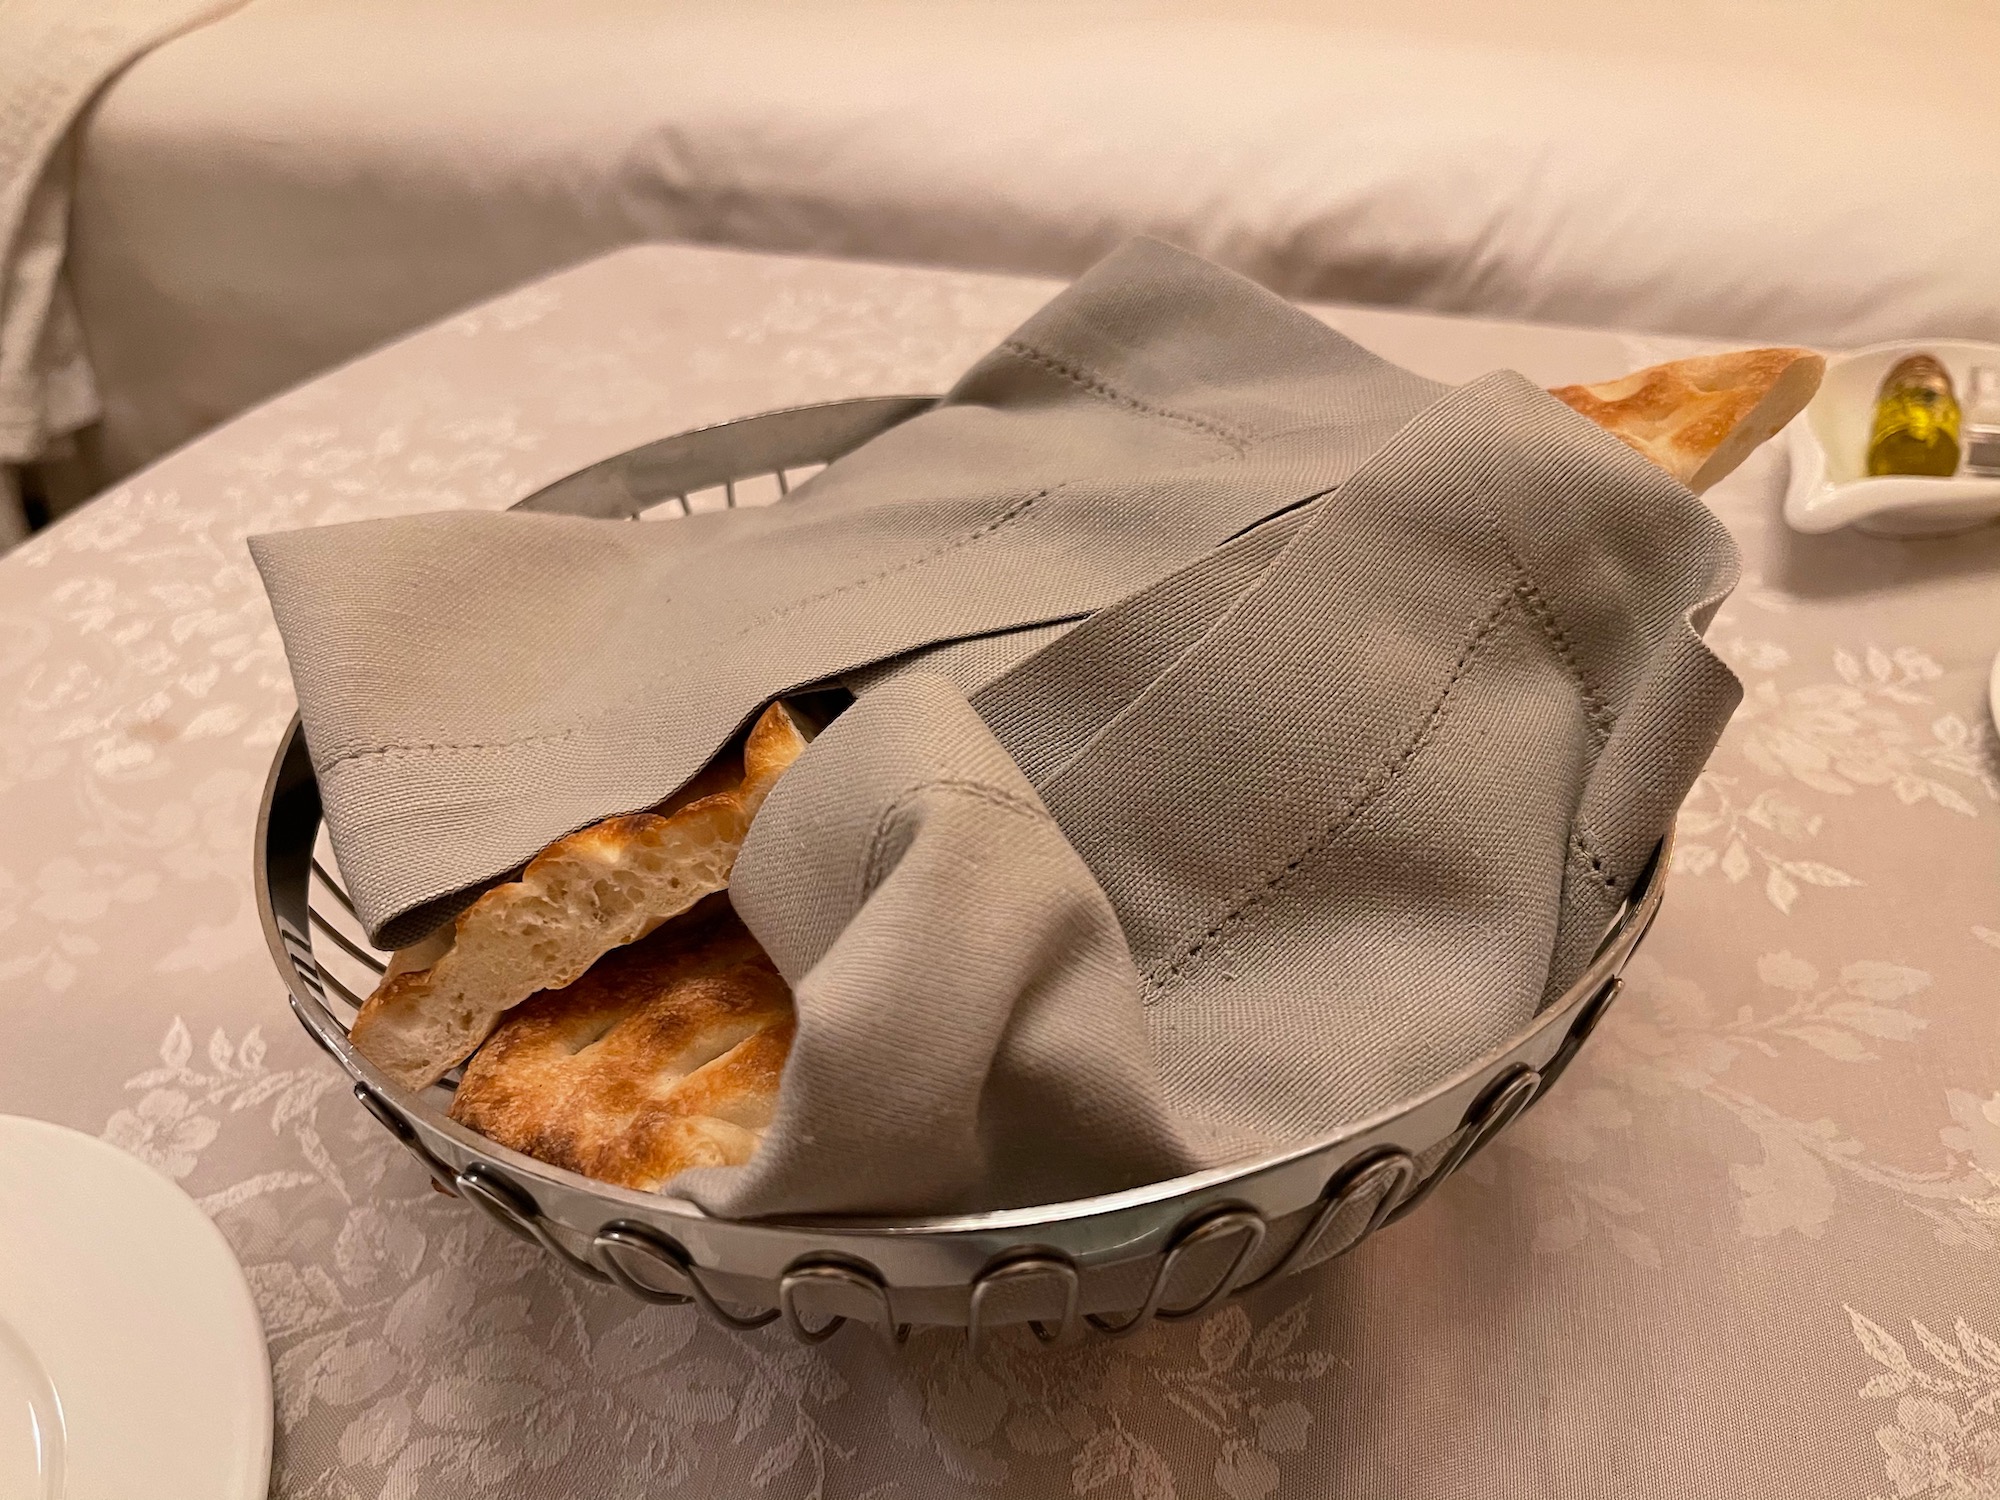 a bowl of bread and napkin